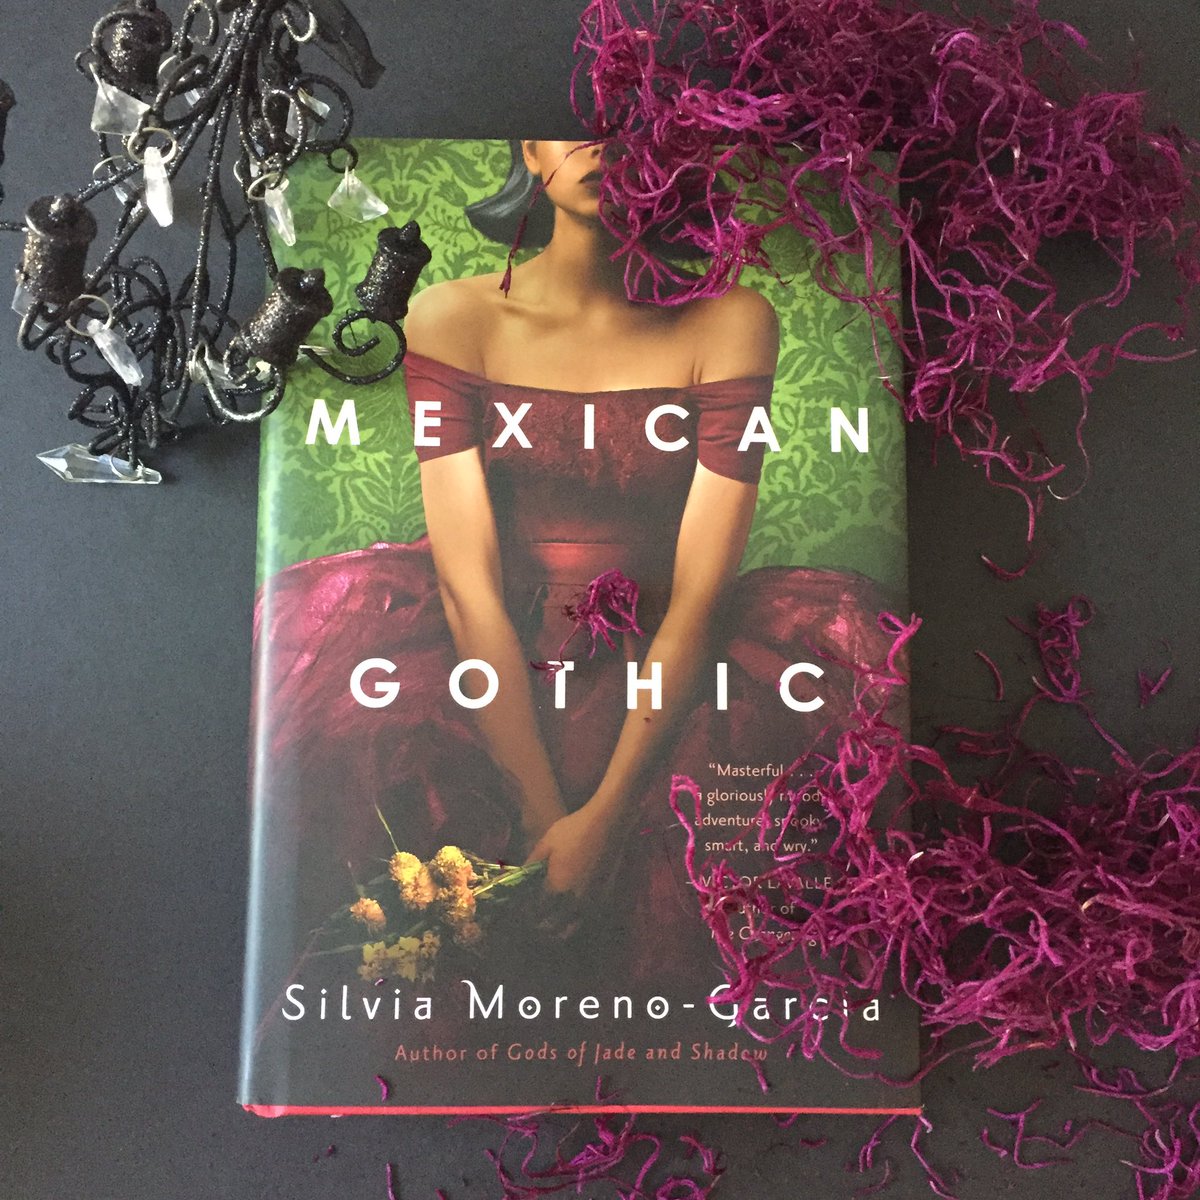 Before everything hit the fan in Washington I managed to finish reading this and it’s SO GOOD!
All the praise it’s getting is well deserved.
#mexicangothic #silviamorenogarcia